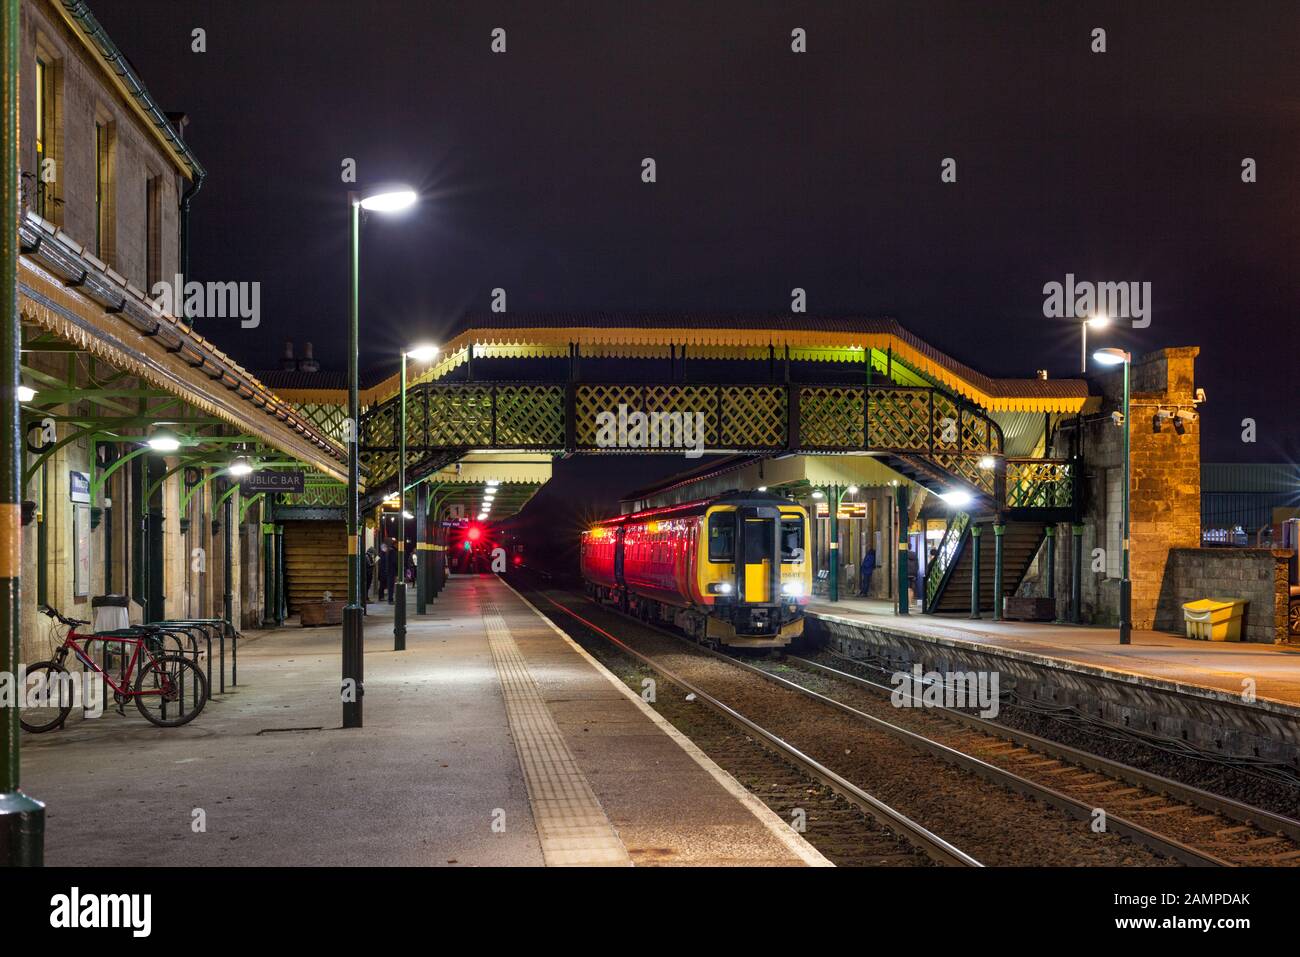 East Midlands railway class 156 sprinter train at  Worksop railway station after arriving with a Robin Hood line service from Nottingham Stock Photo